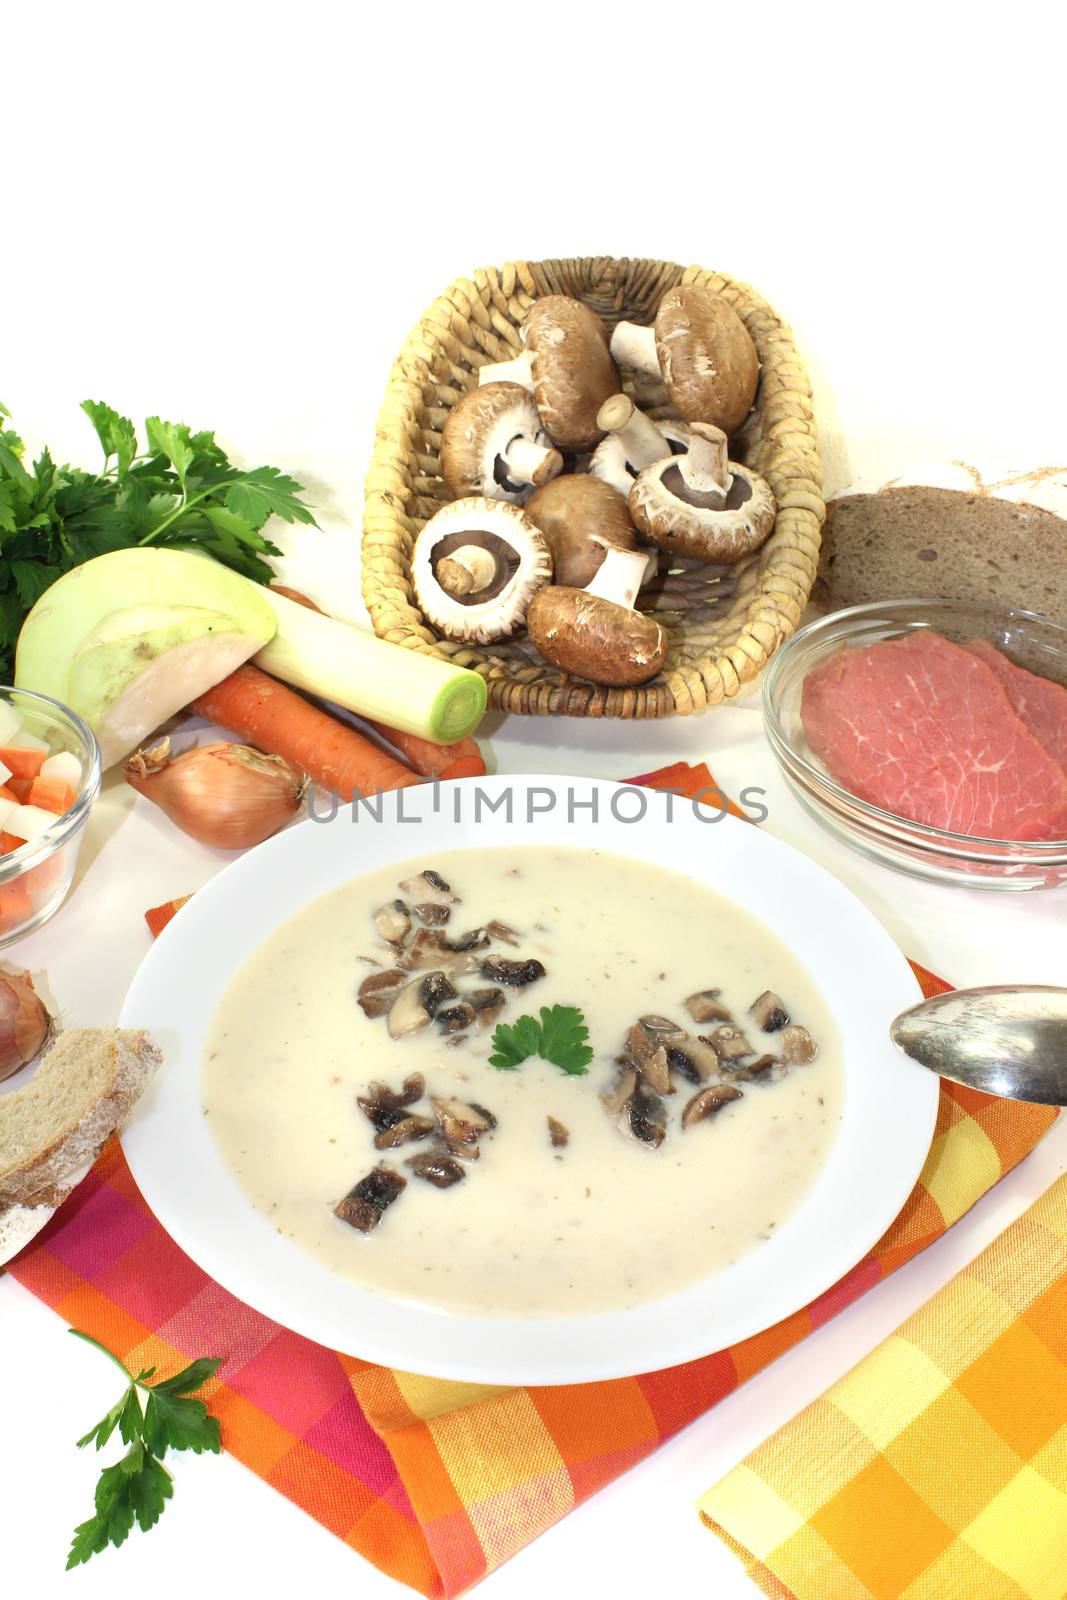 Veal cream soup with mushrooms and parsley on a light background